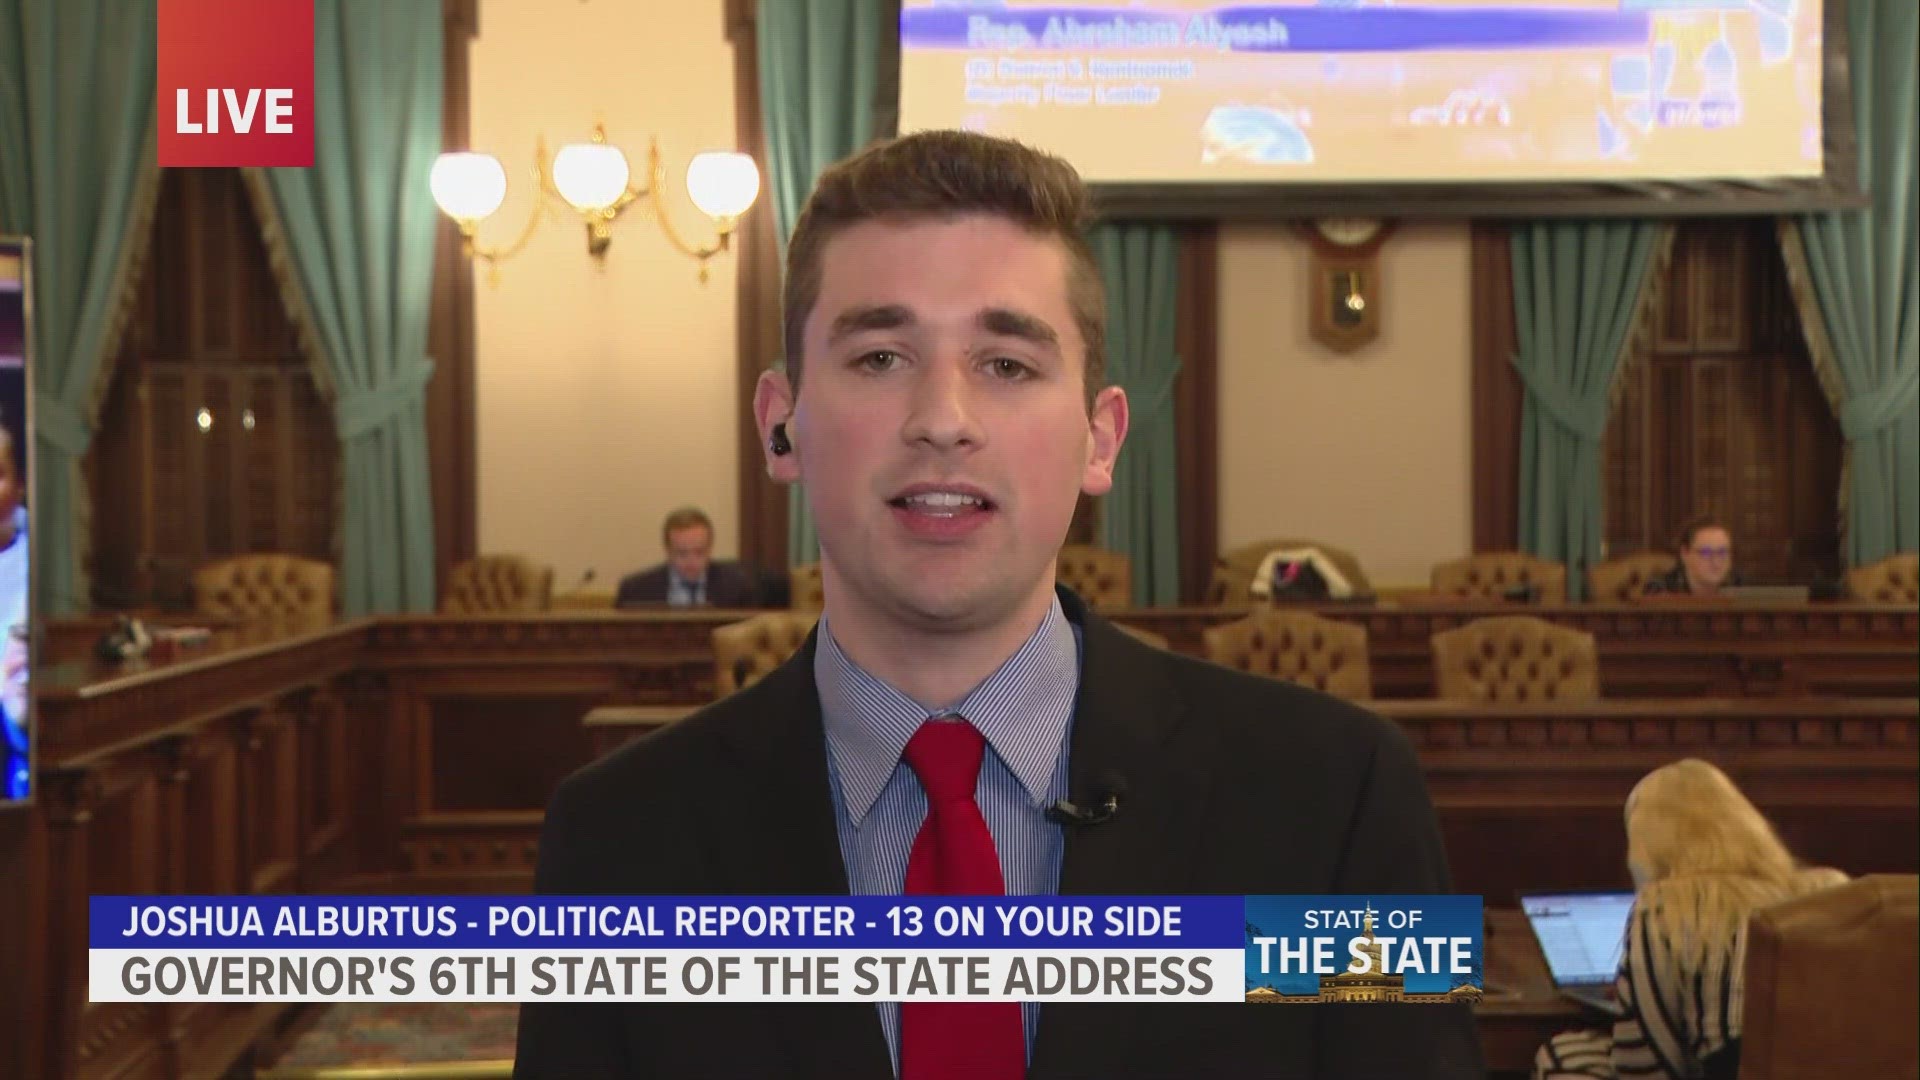 The State of the State Address will be delivered at 7 p.m. on Wednesday.